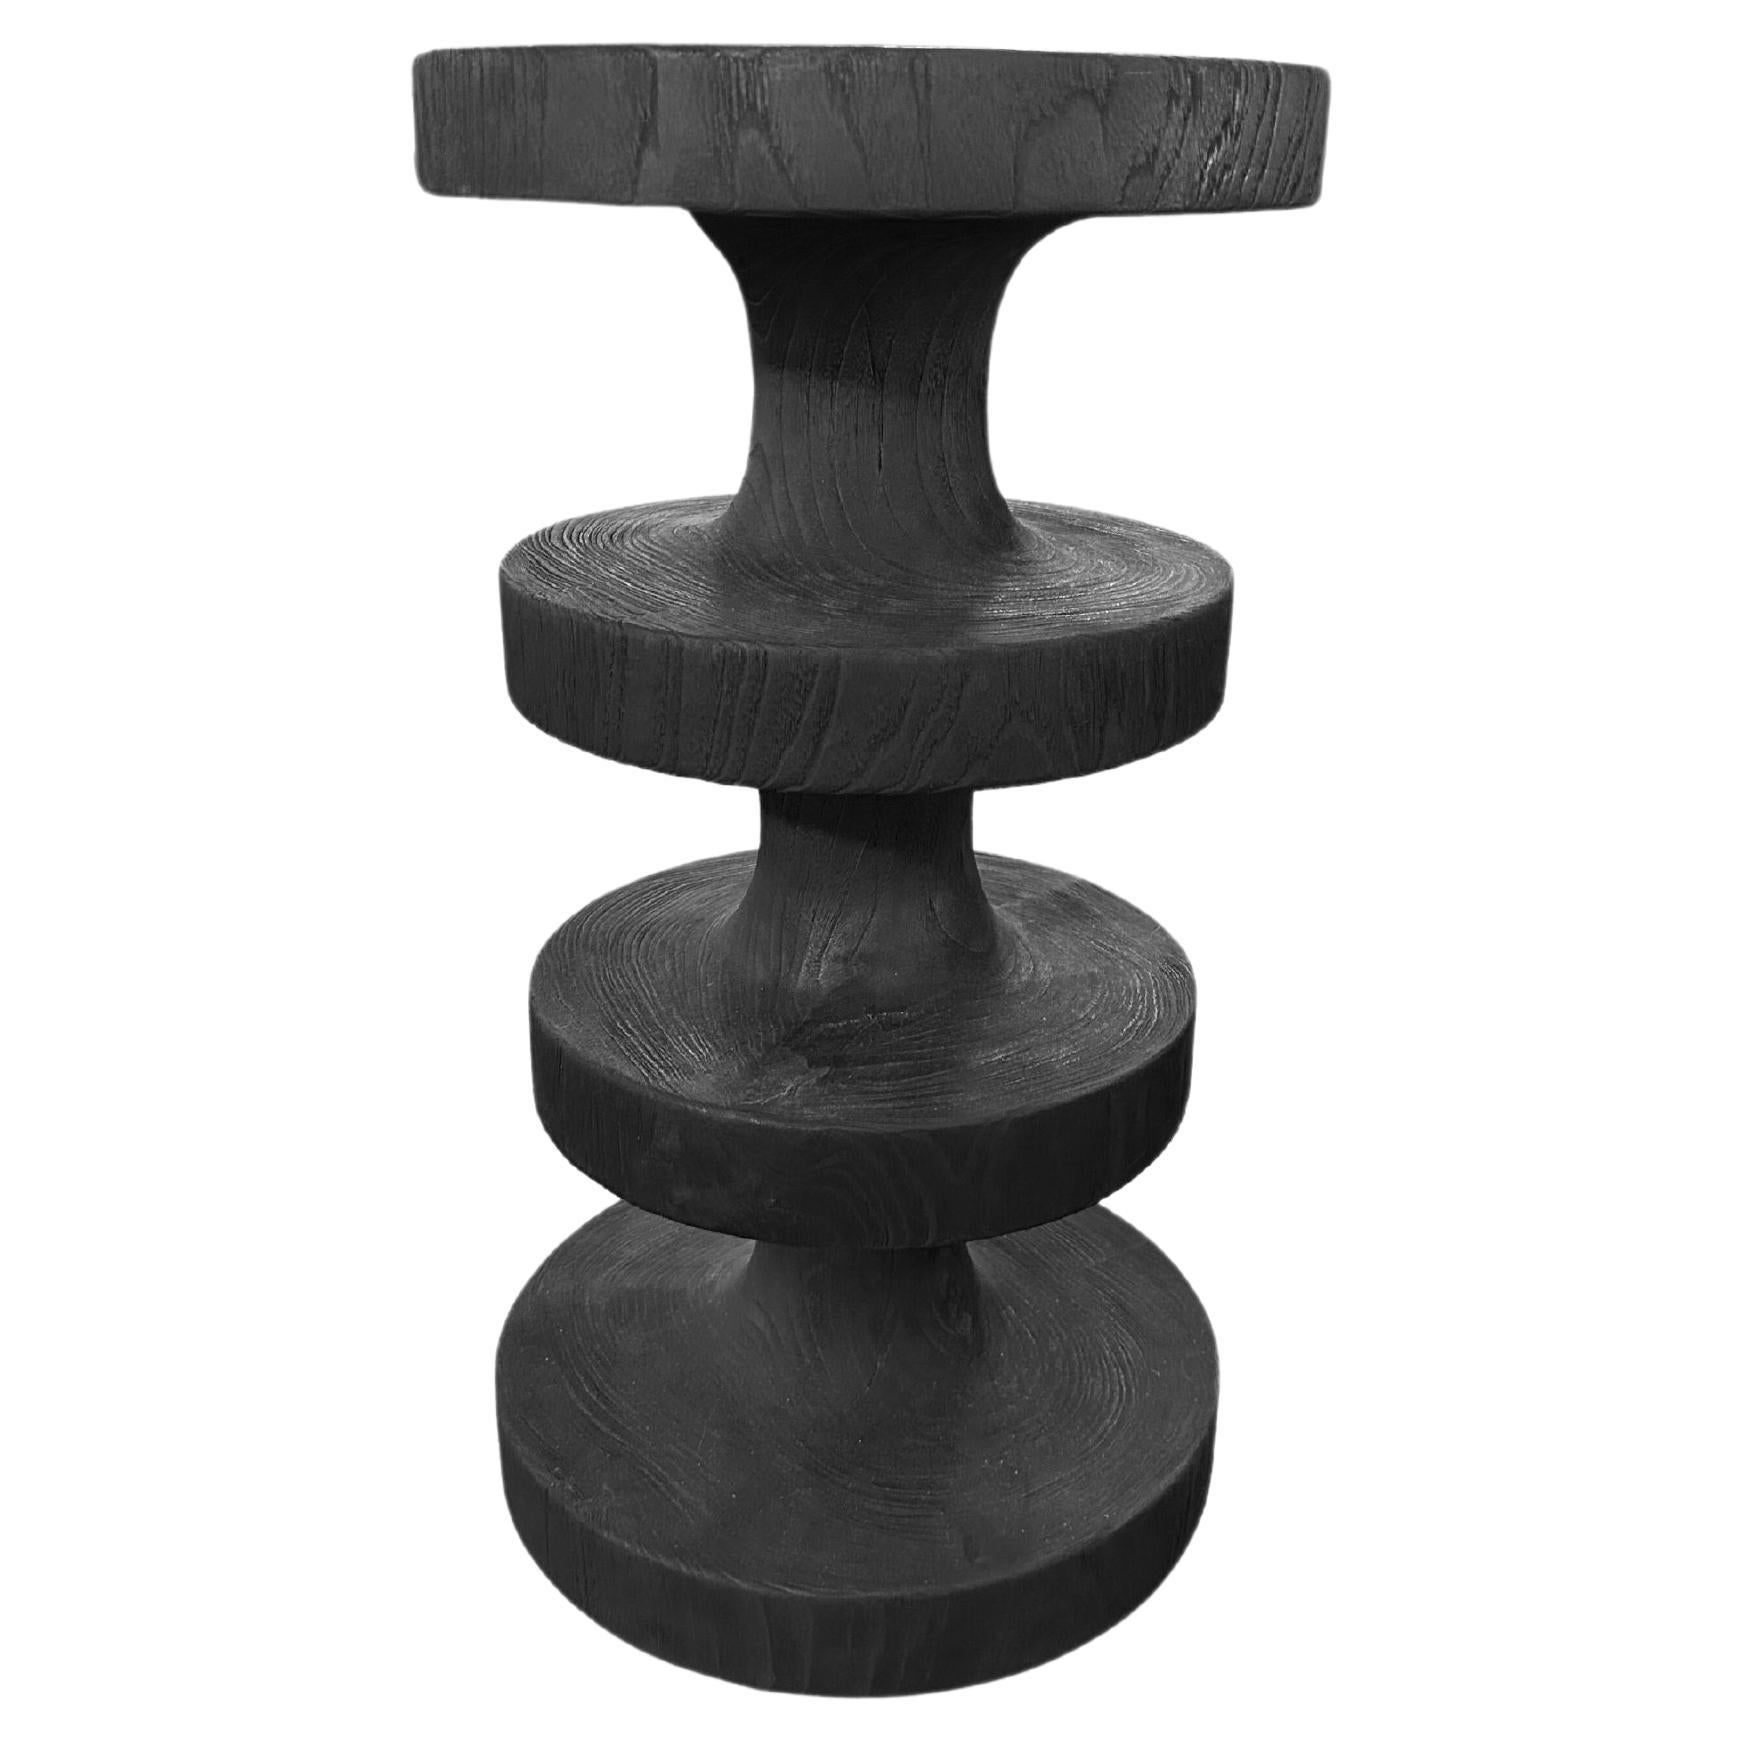 Sculptural Stool Carved from Solid Teak Wood, Burnt Finish Modern Organic For Sale